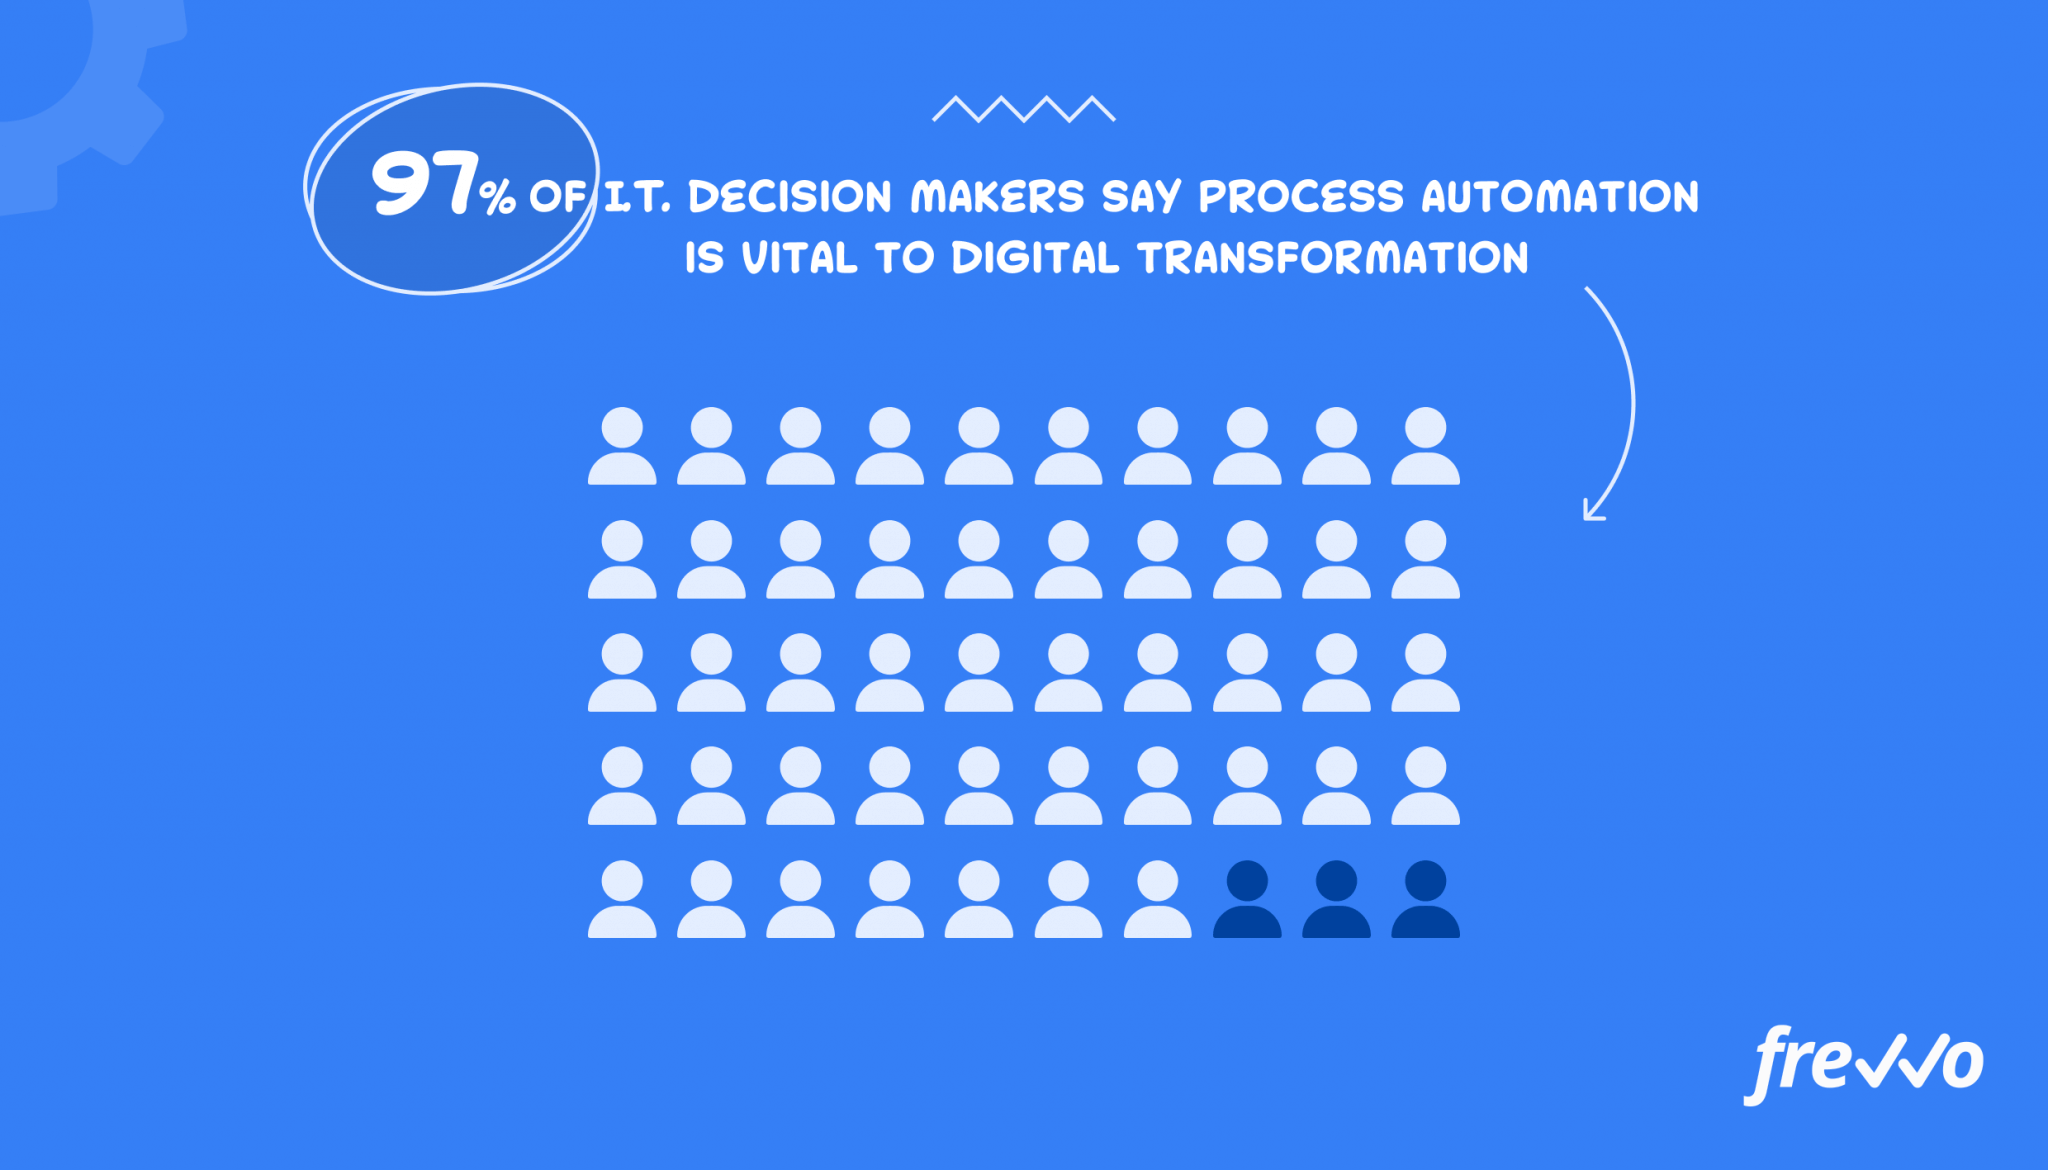 97% of IT decision makers say process automation is vital to digital transformation